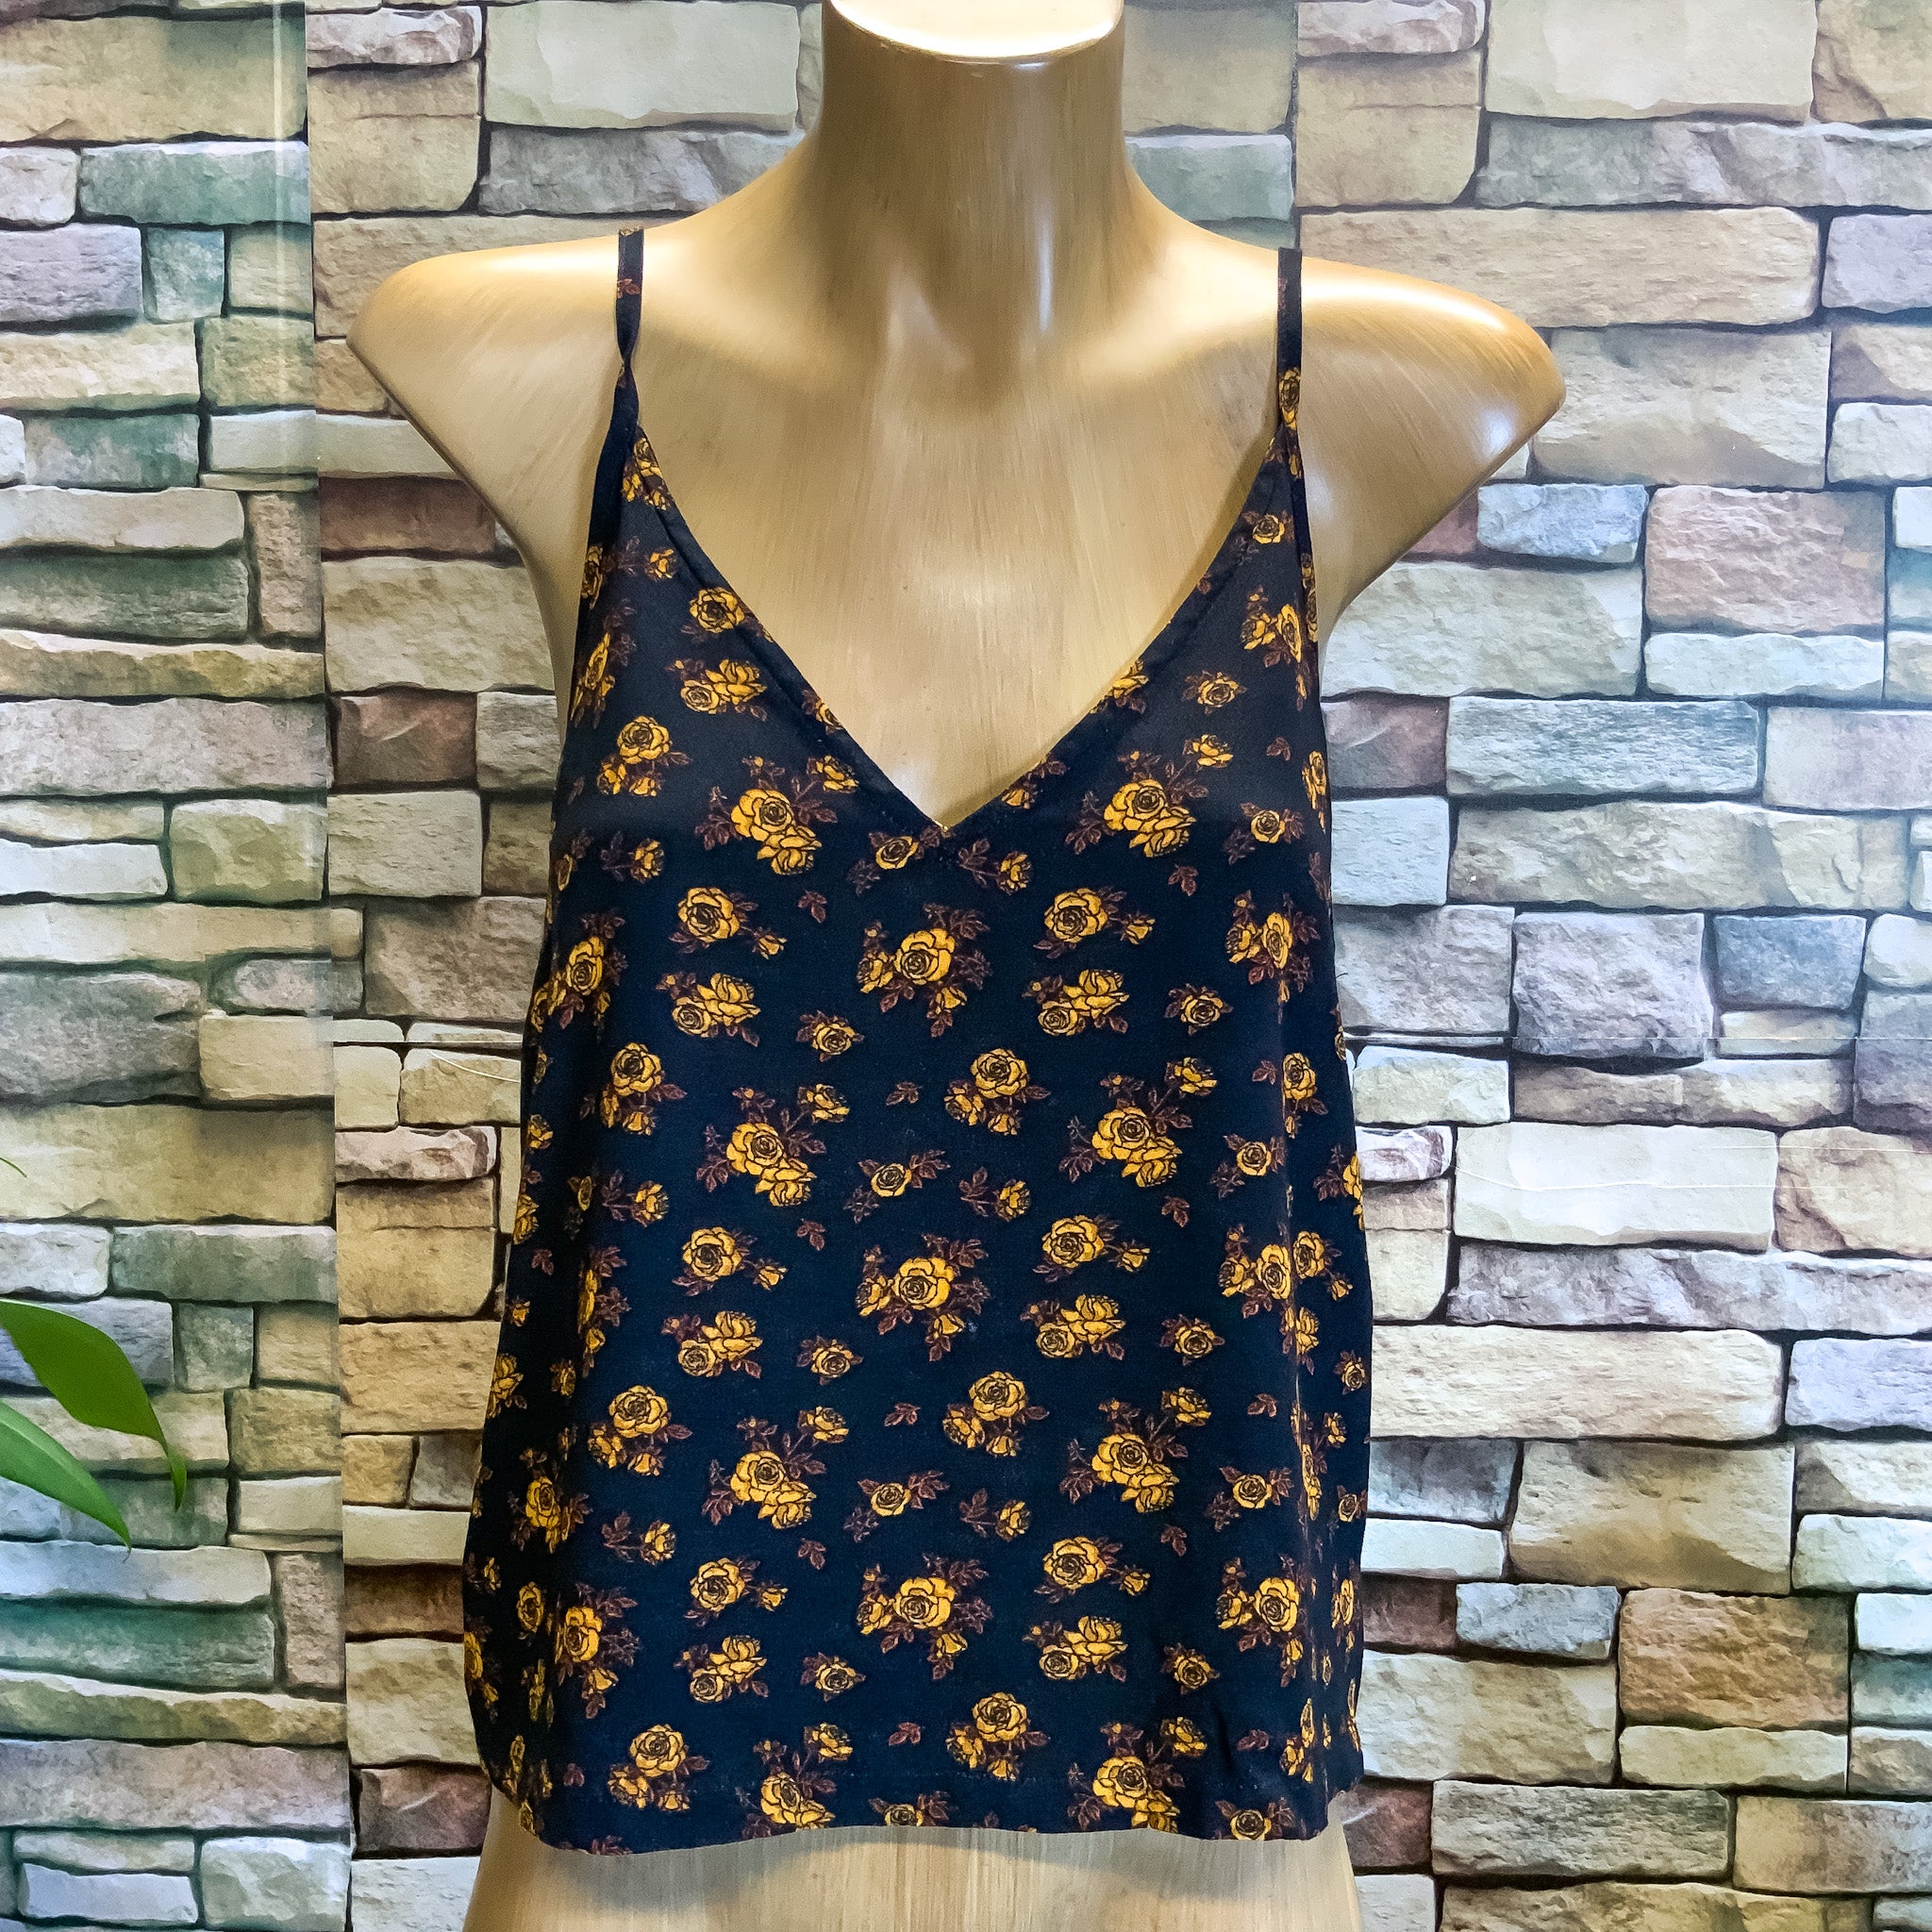 ELEMENT Blackwater Floral Camisole Top in black - Size XS